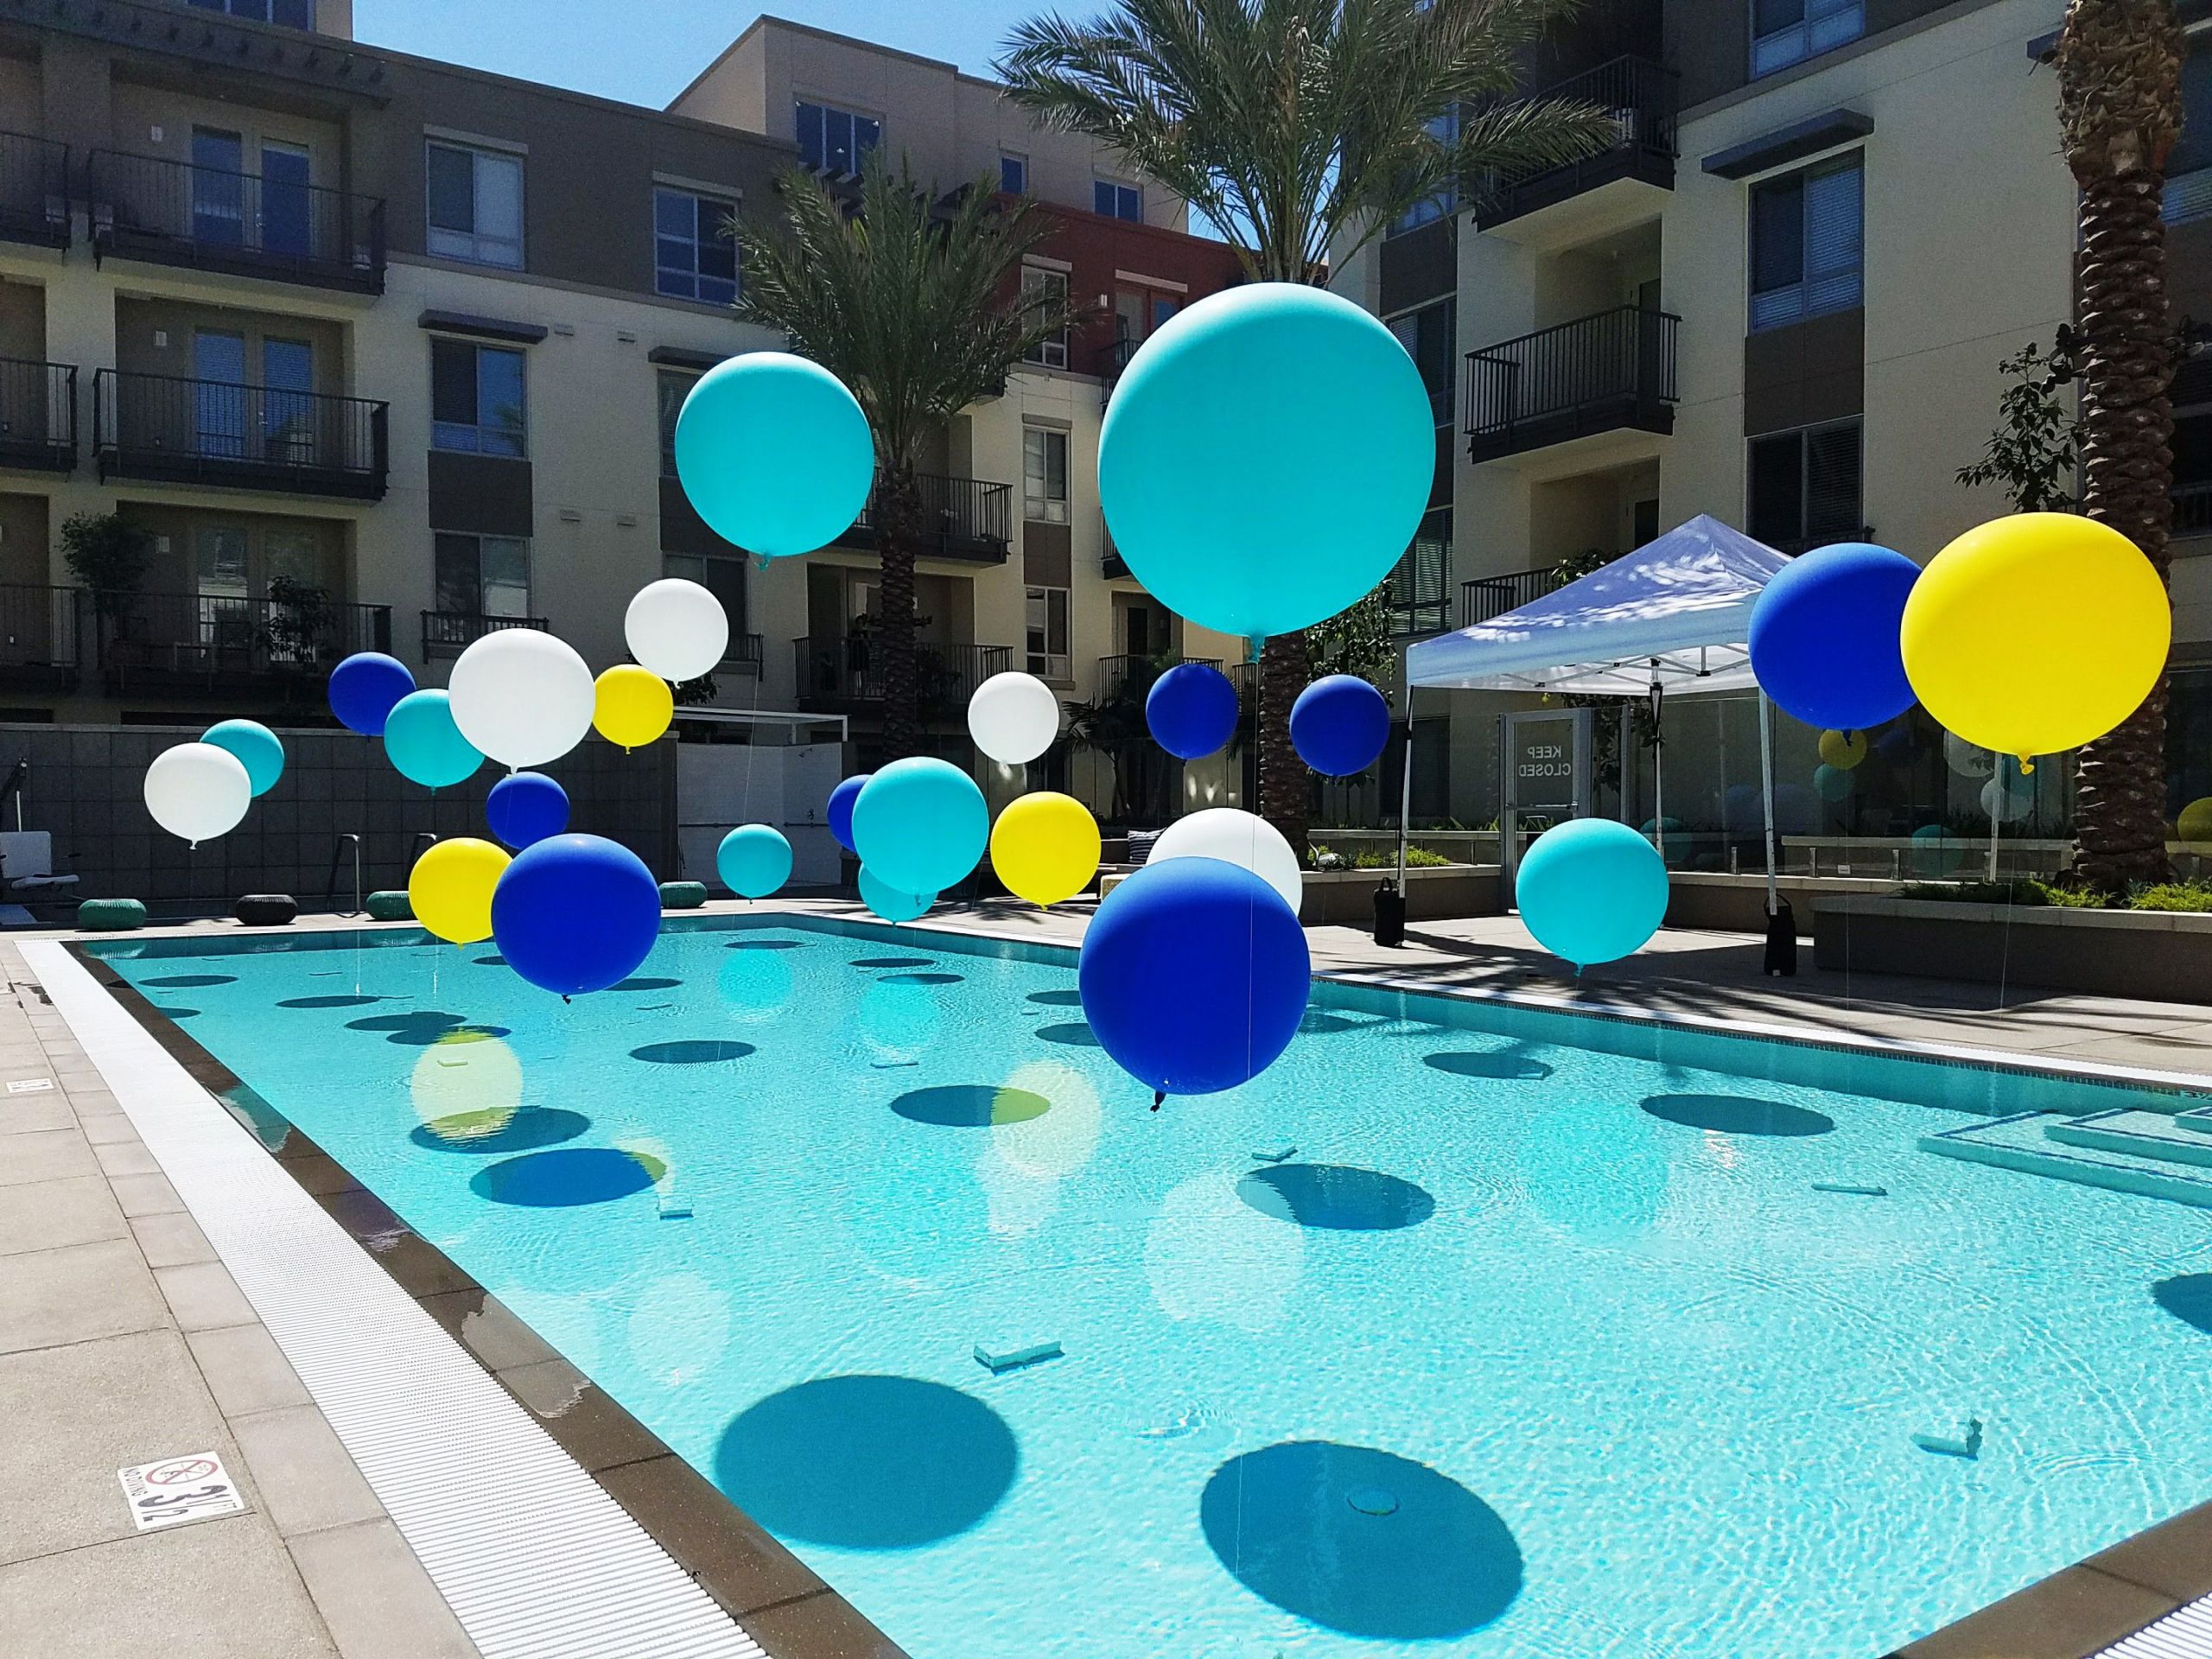 Swimming Pools Party Ideas
 Pool balloons summer party pool party party ideas in